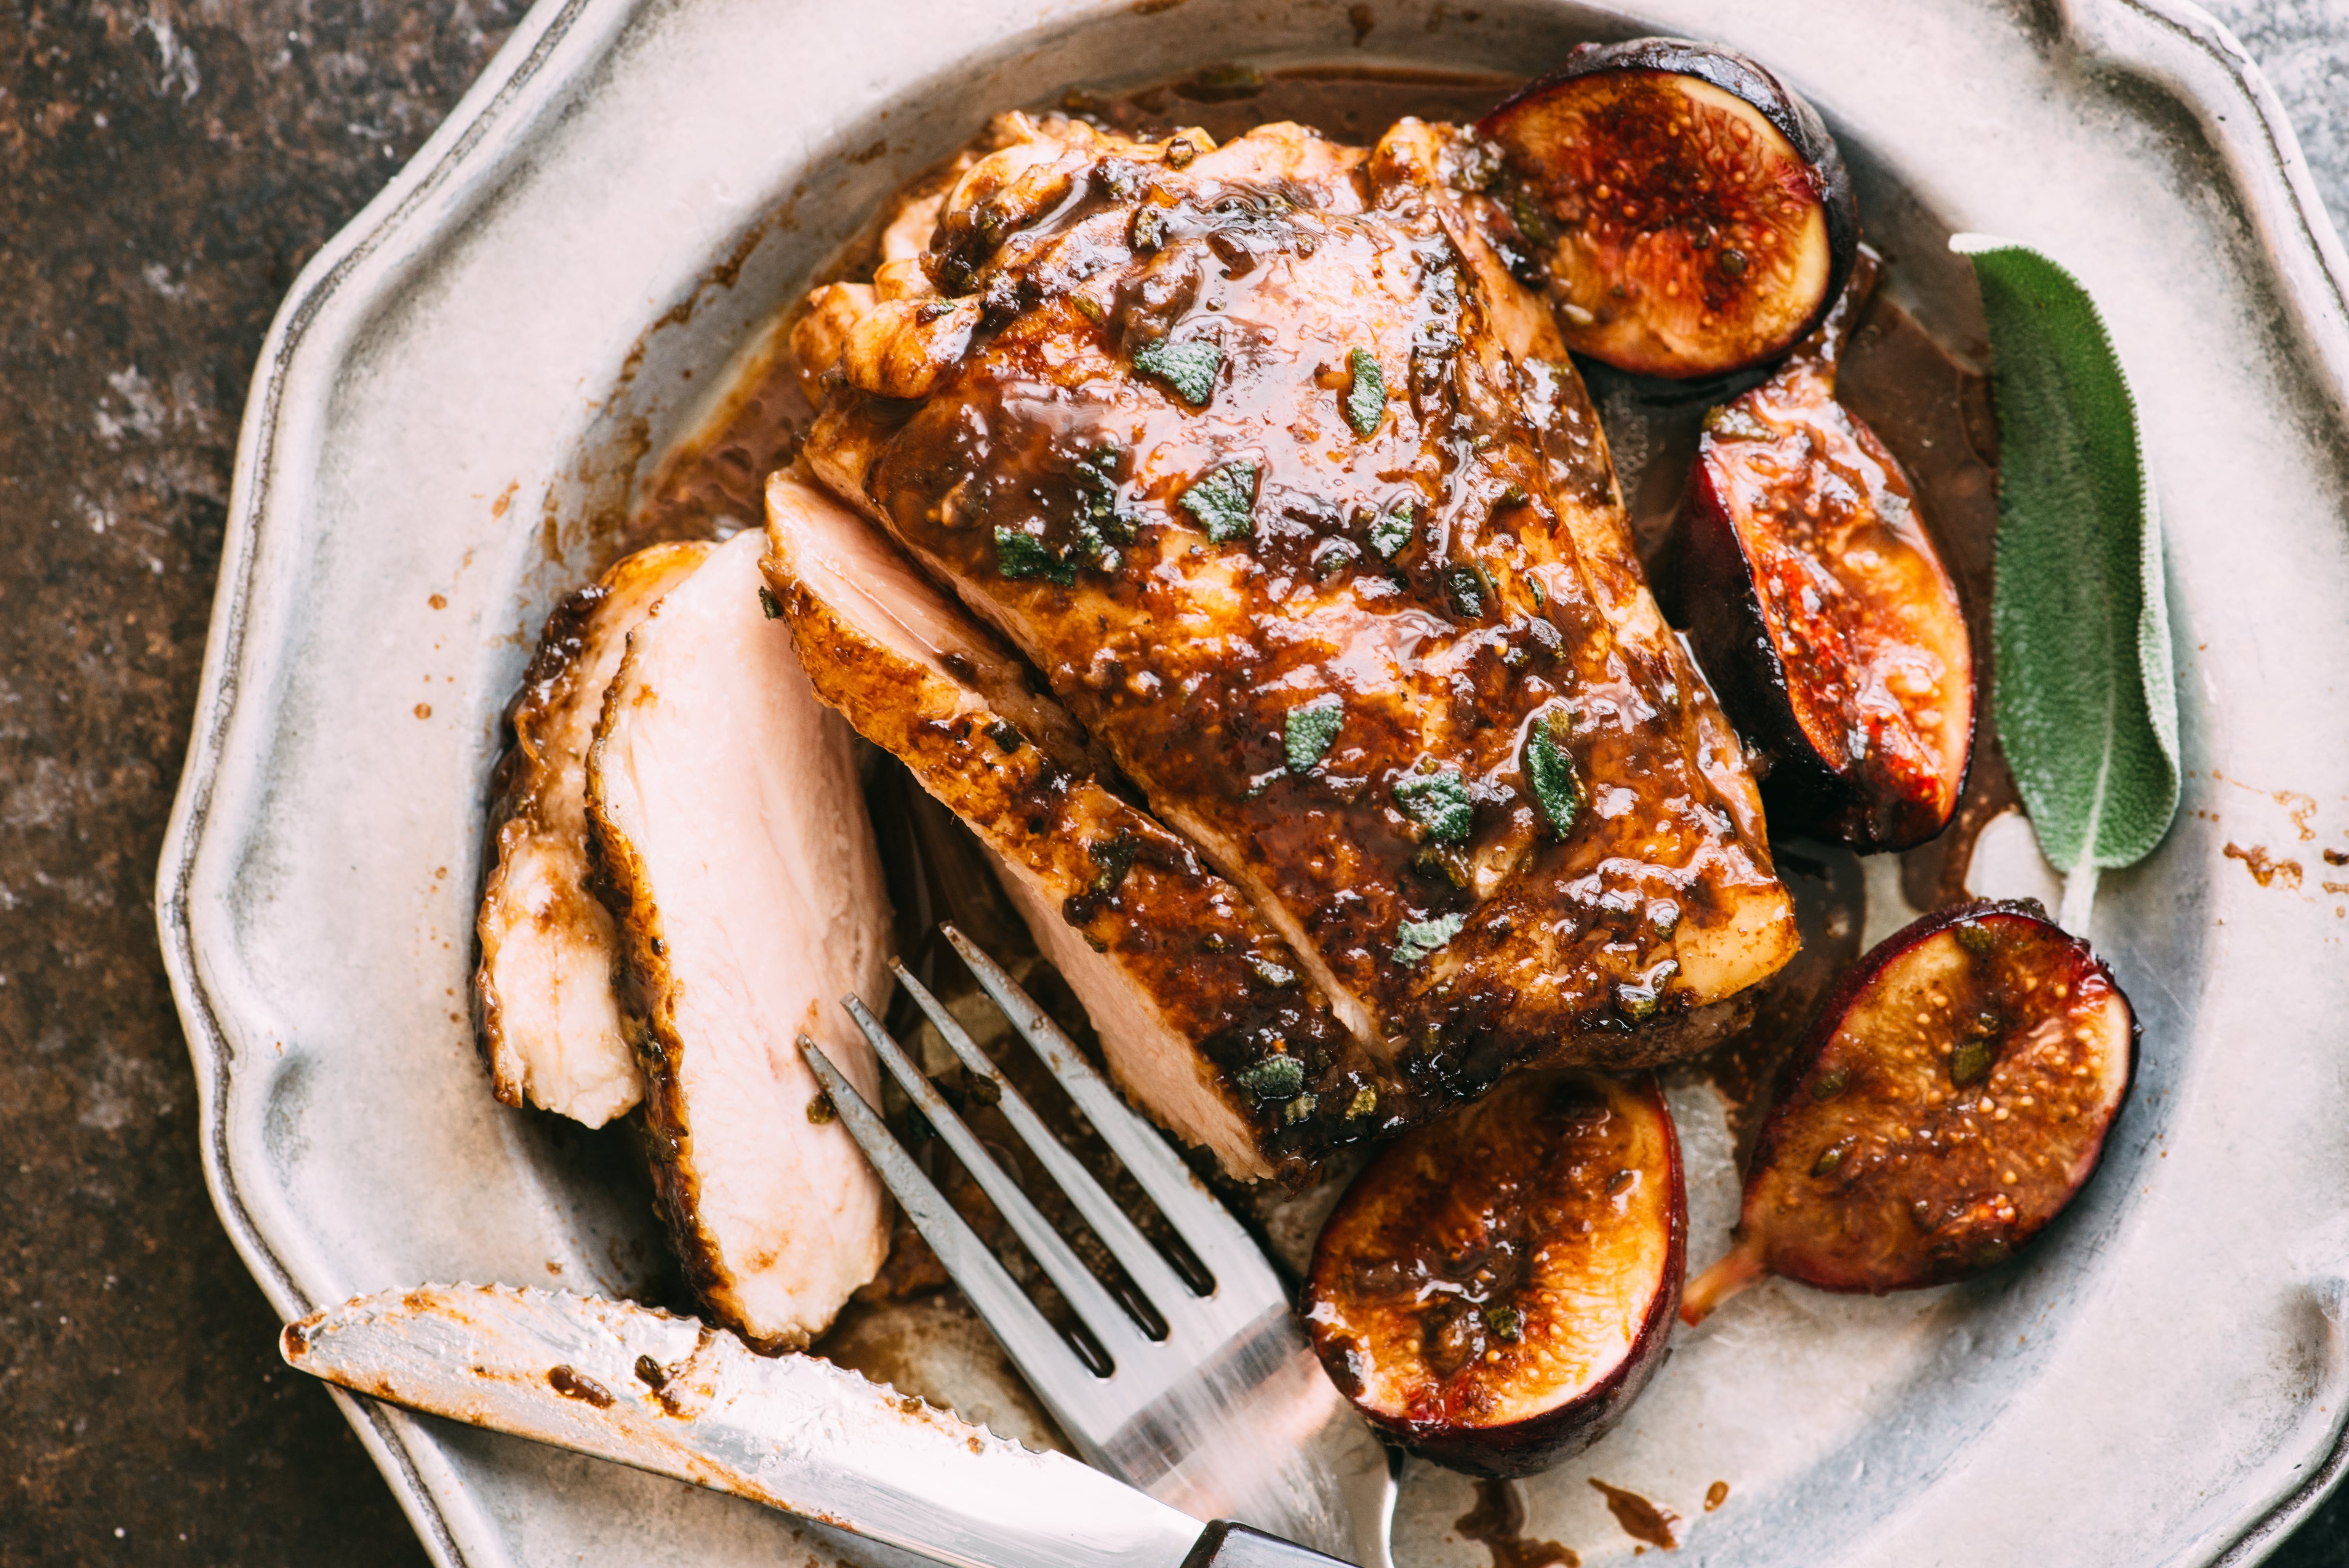 Balsamic & Mustard Glazed Chicken Thighs and Figs